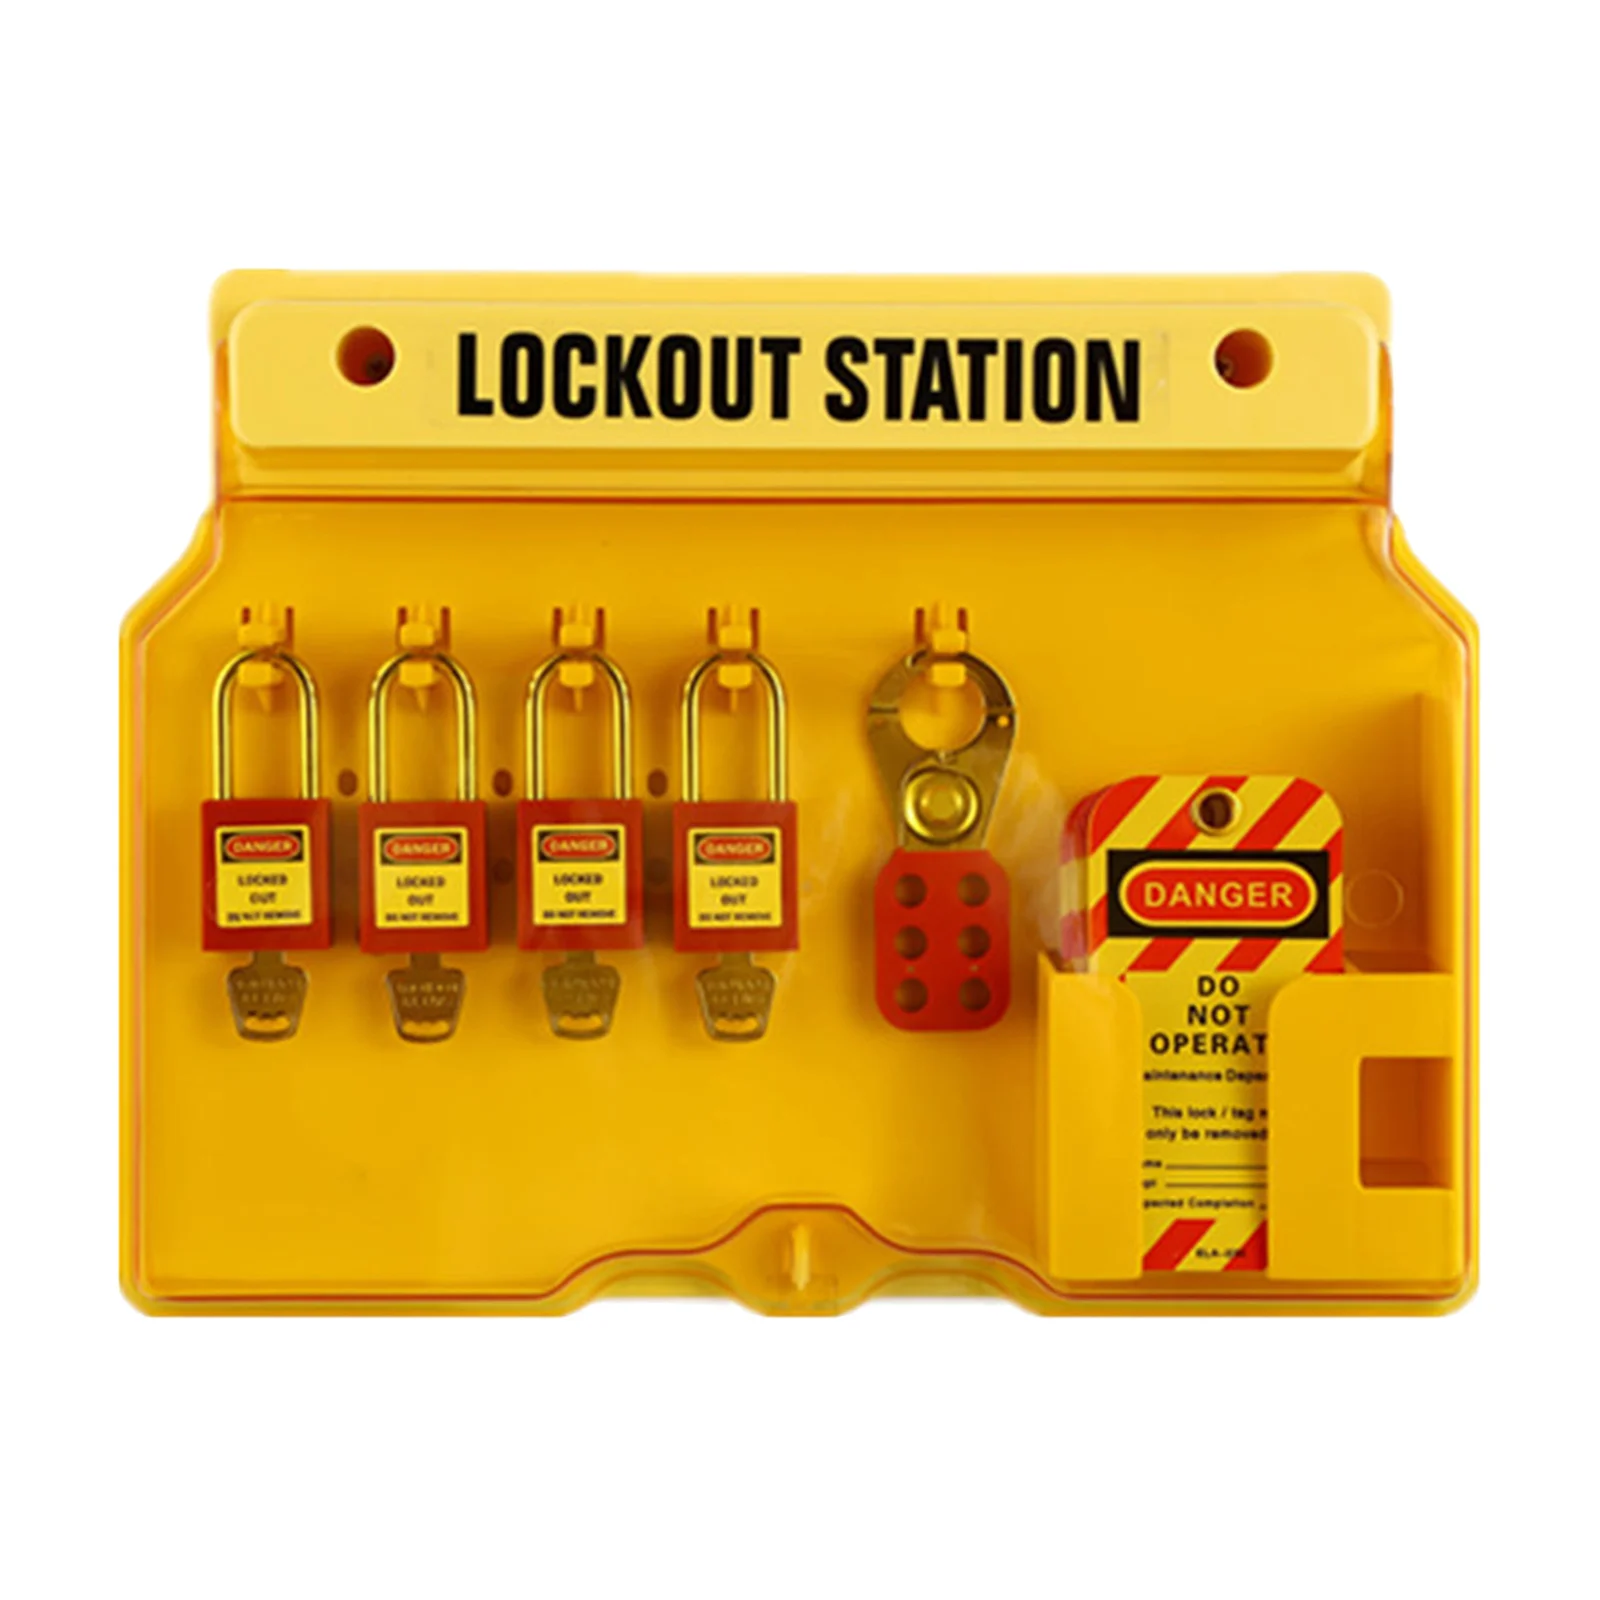 

Wall Mounted Lockout Station Safety Padlocks Tag Out Hasp Keys Tools Covered Group Devices Center For Factories